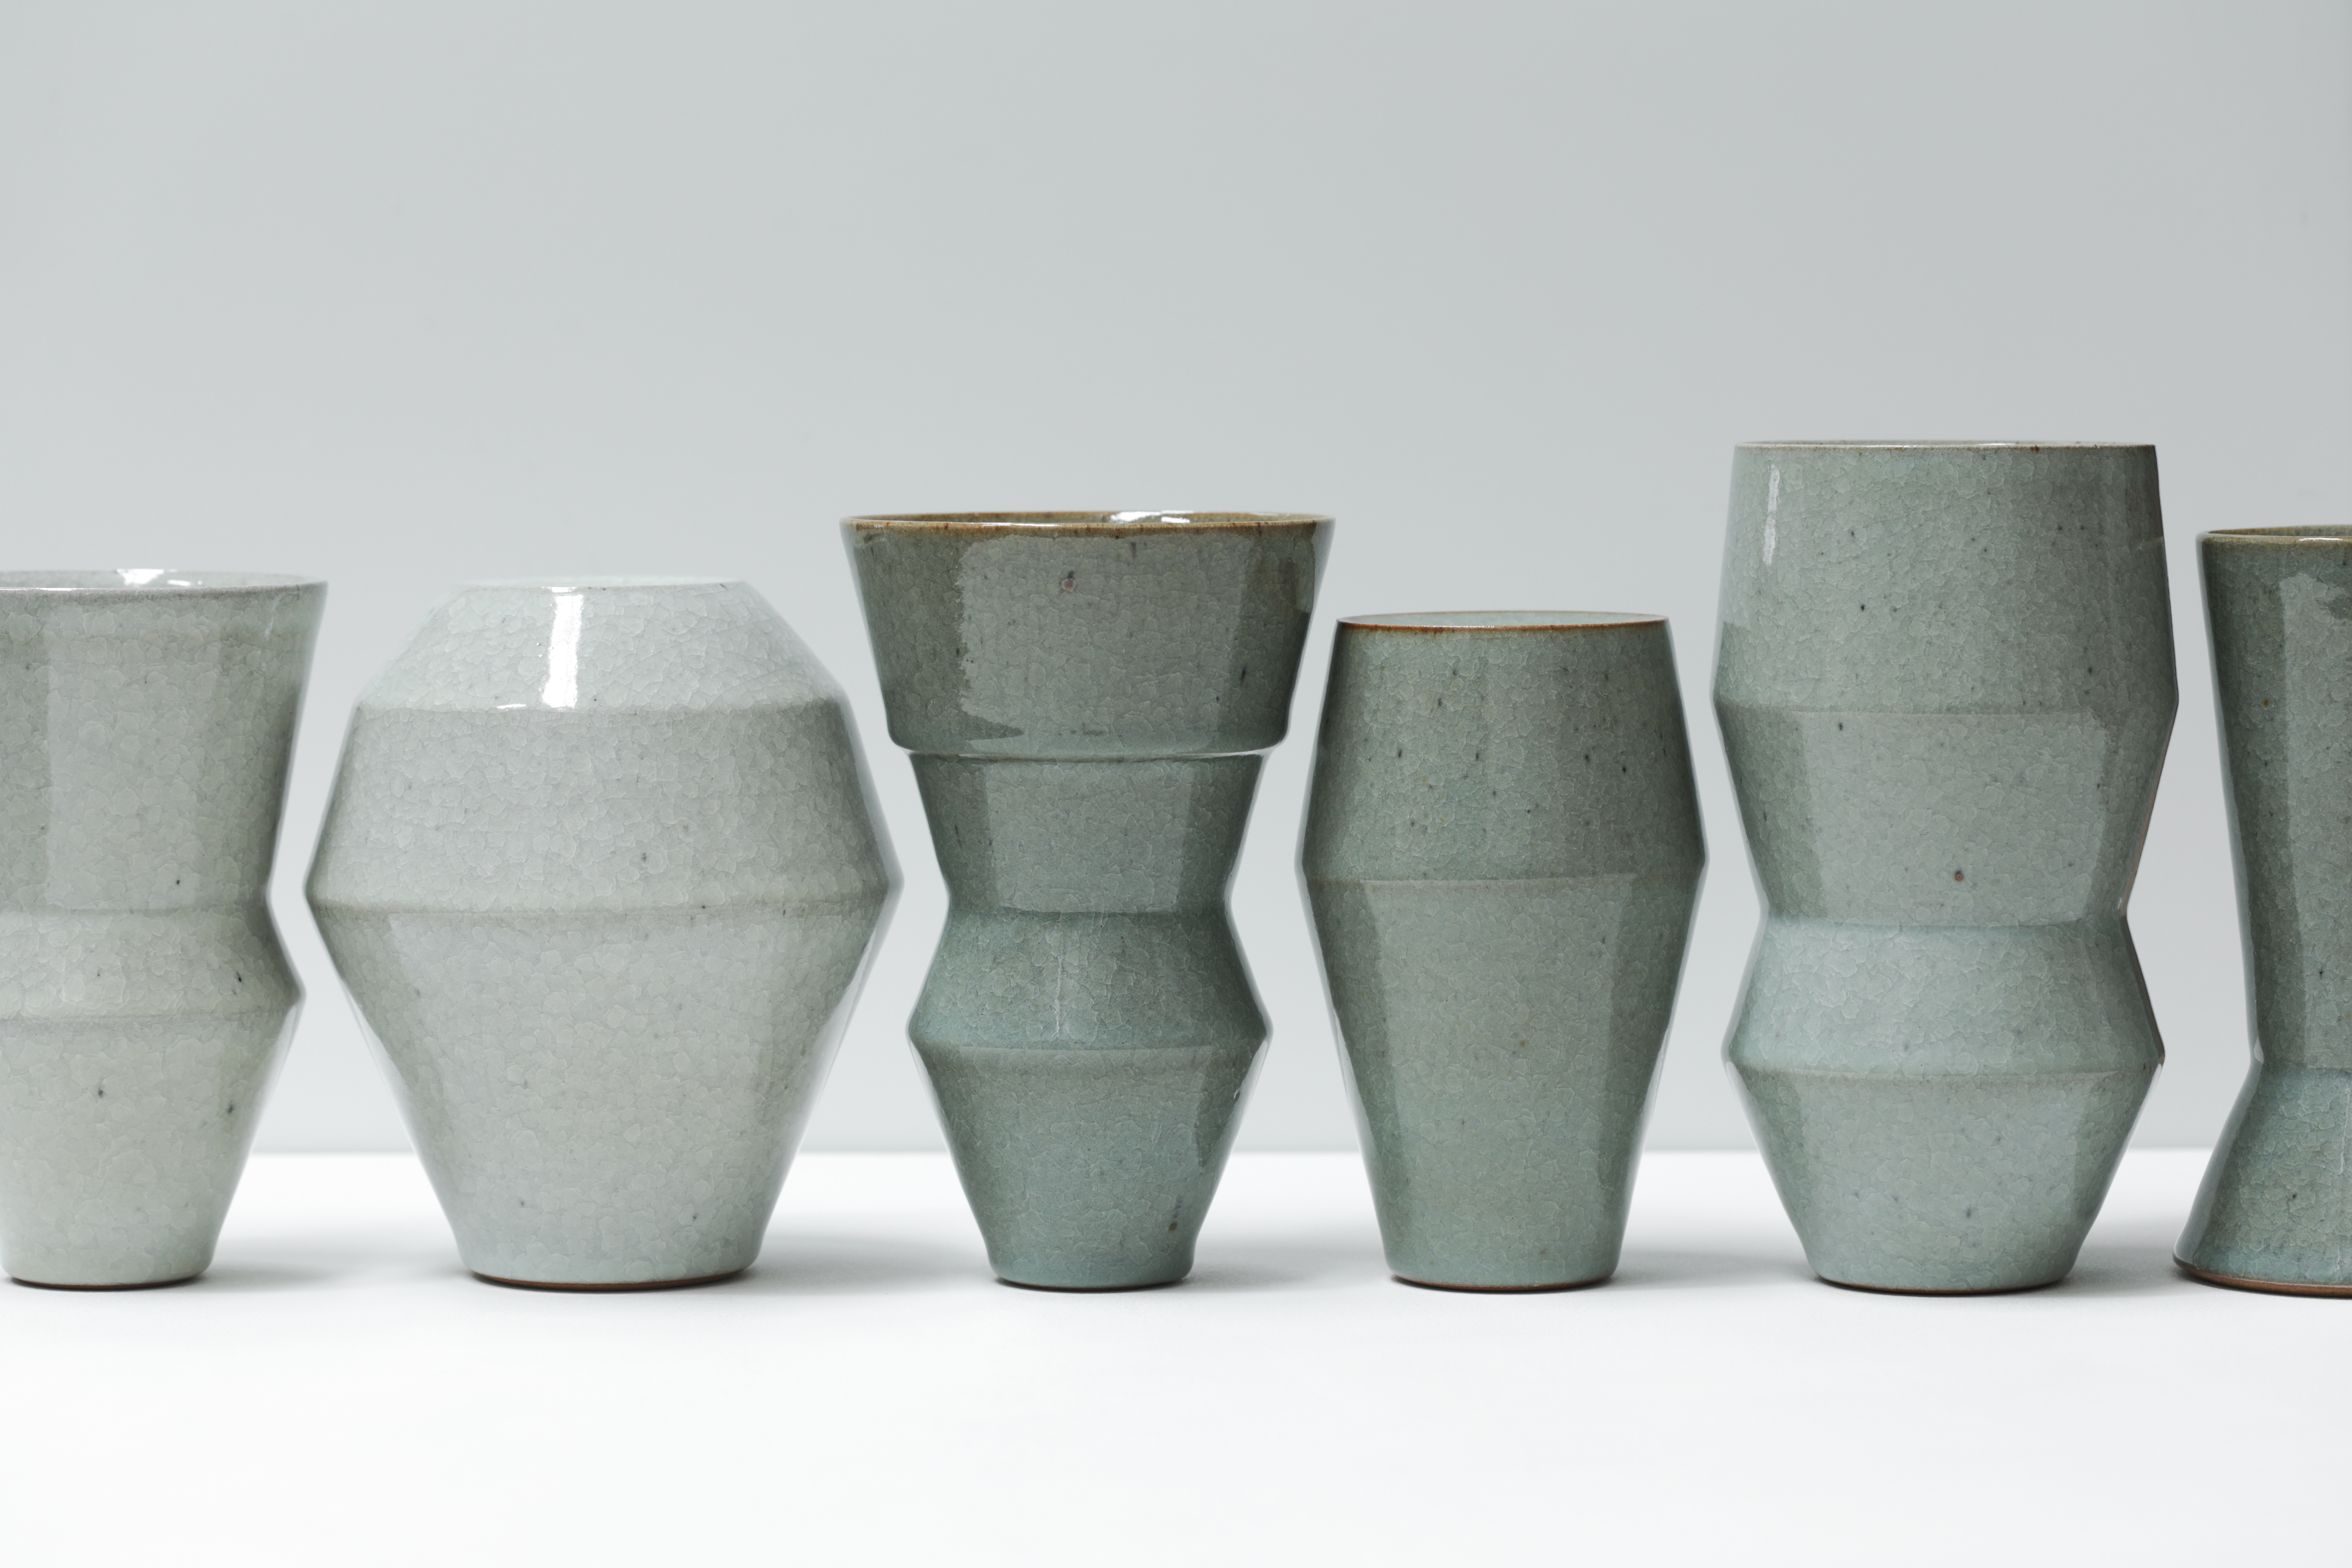 A row of glazed green and grey vases